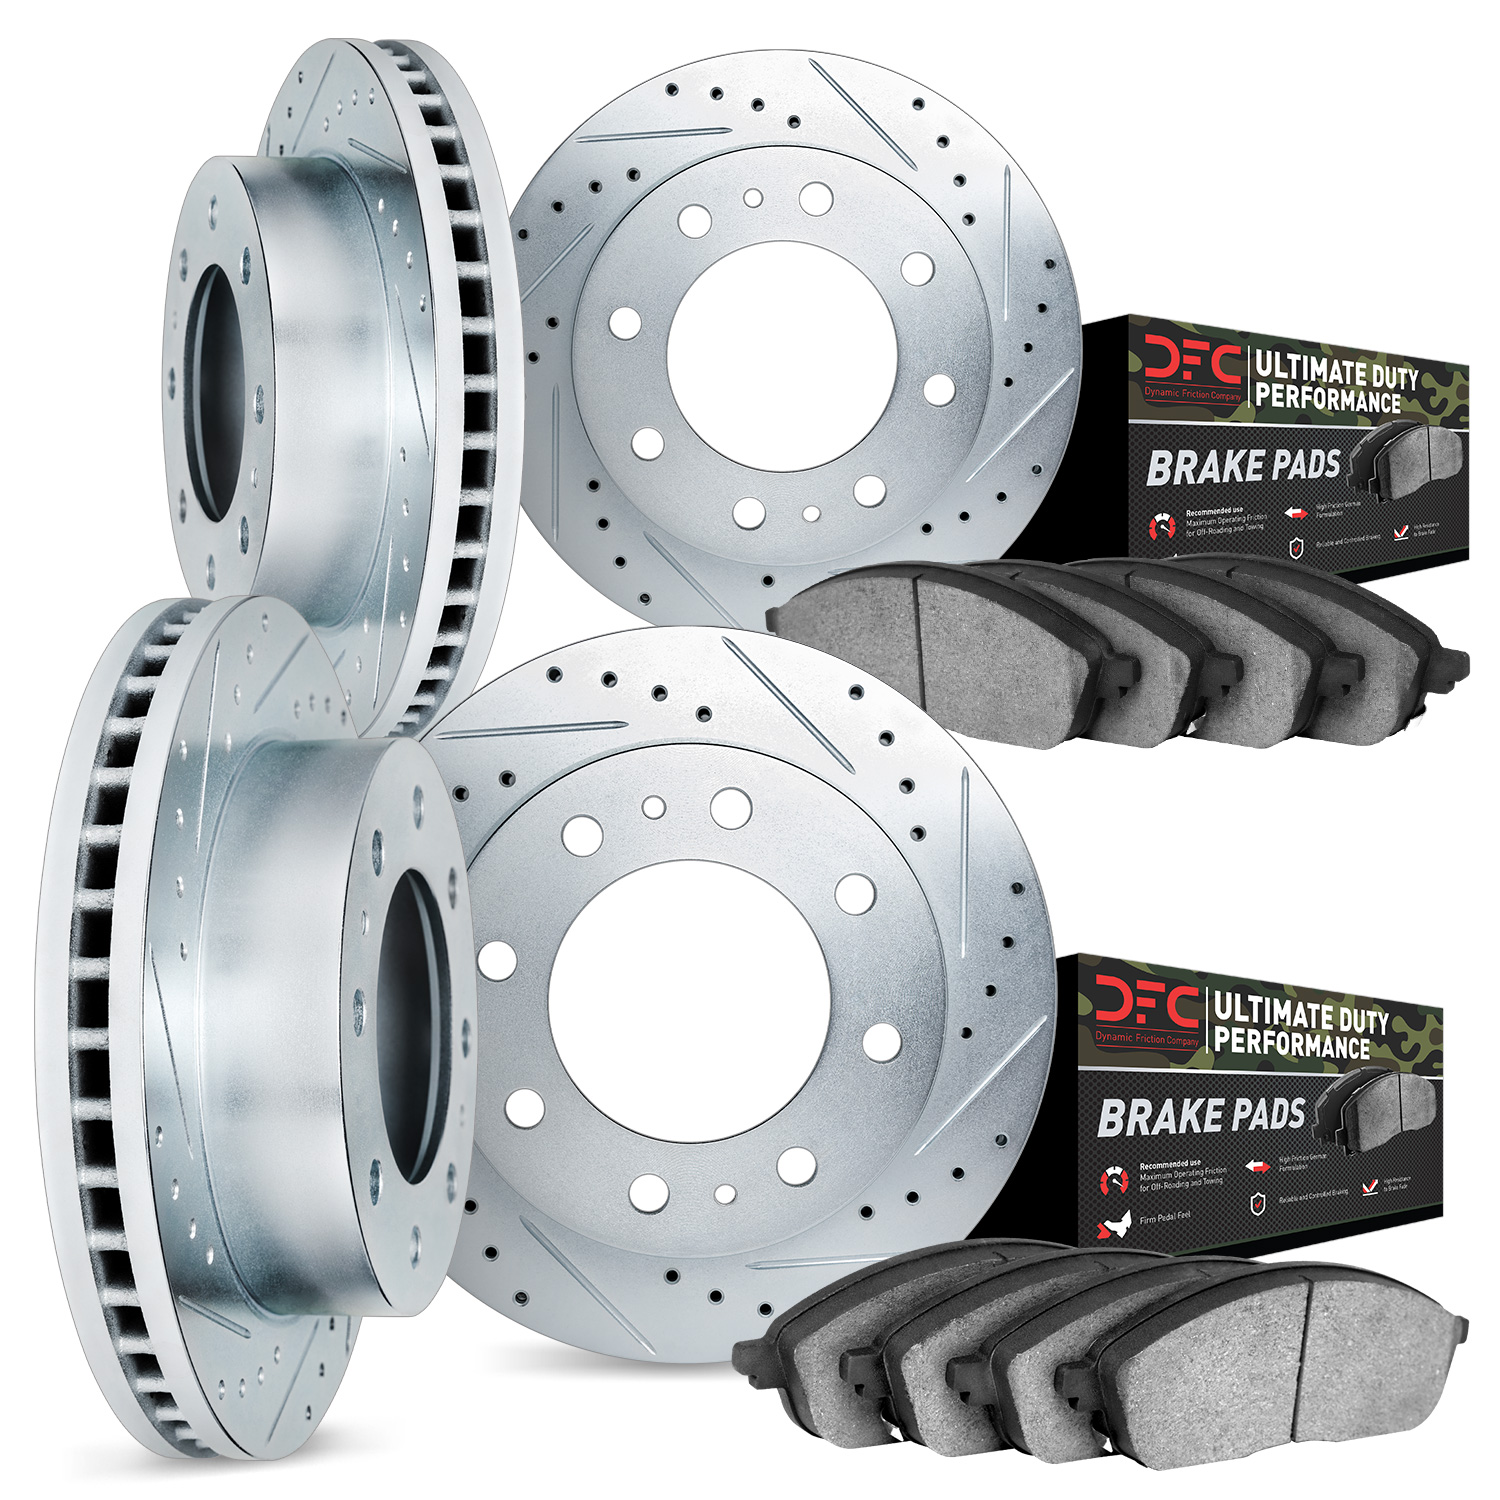 7404-48013 Drilled/Slotted Brake Rotors with Ultimate-Duty Brake Pads Kit [Silver], 2001-2010 GM, Position: Front and Rear